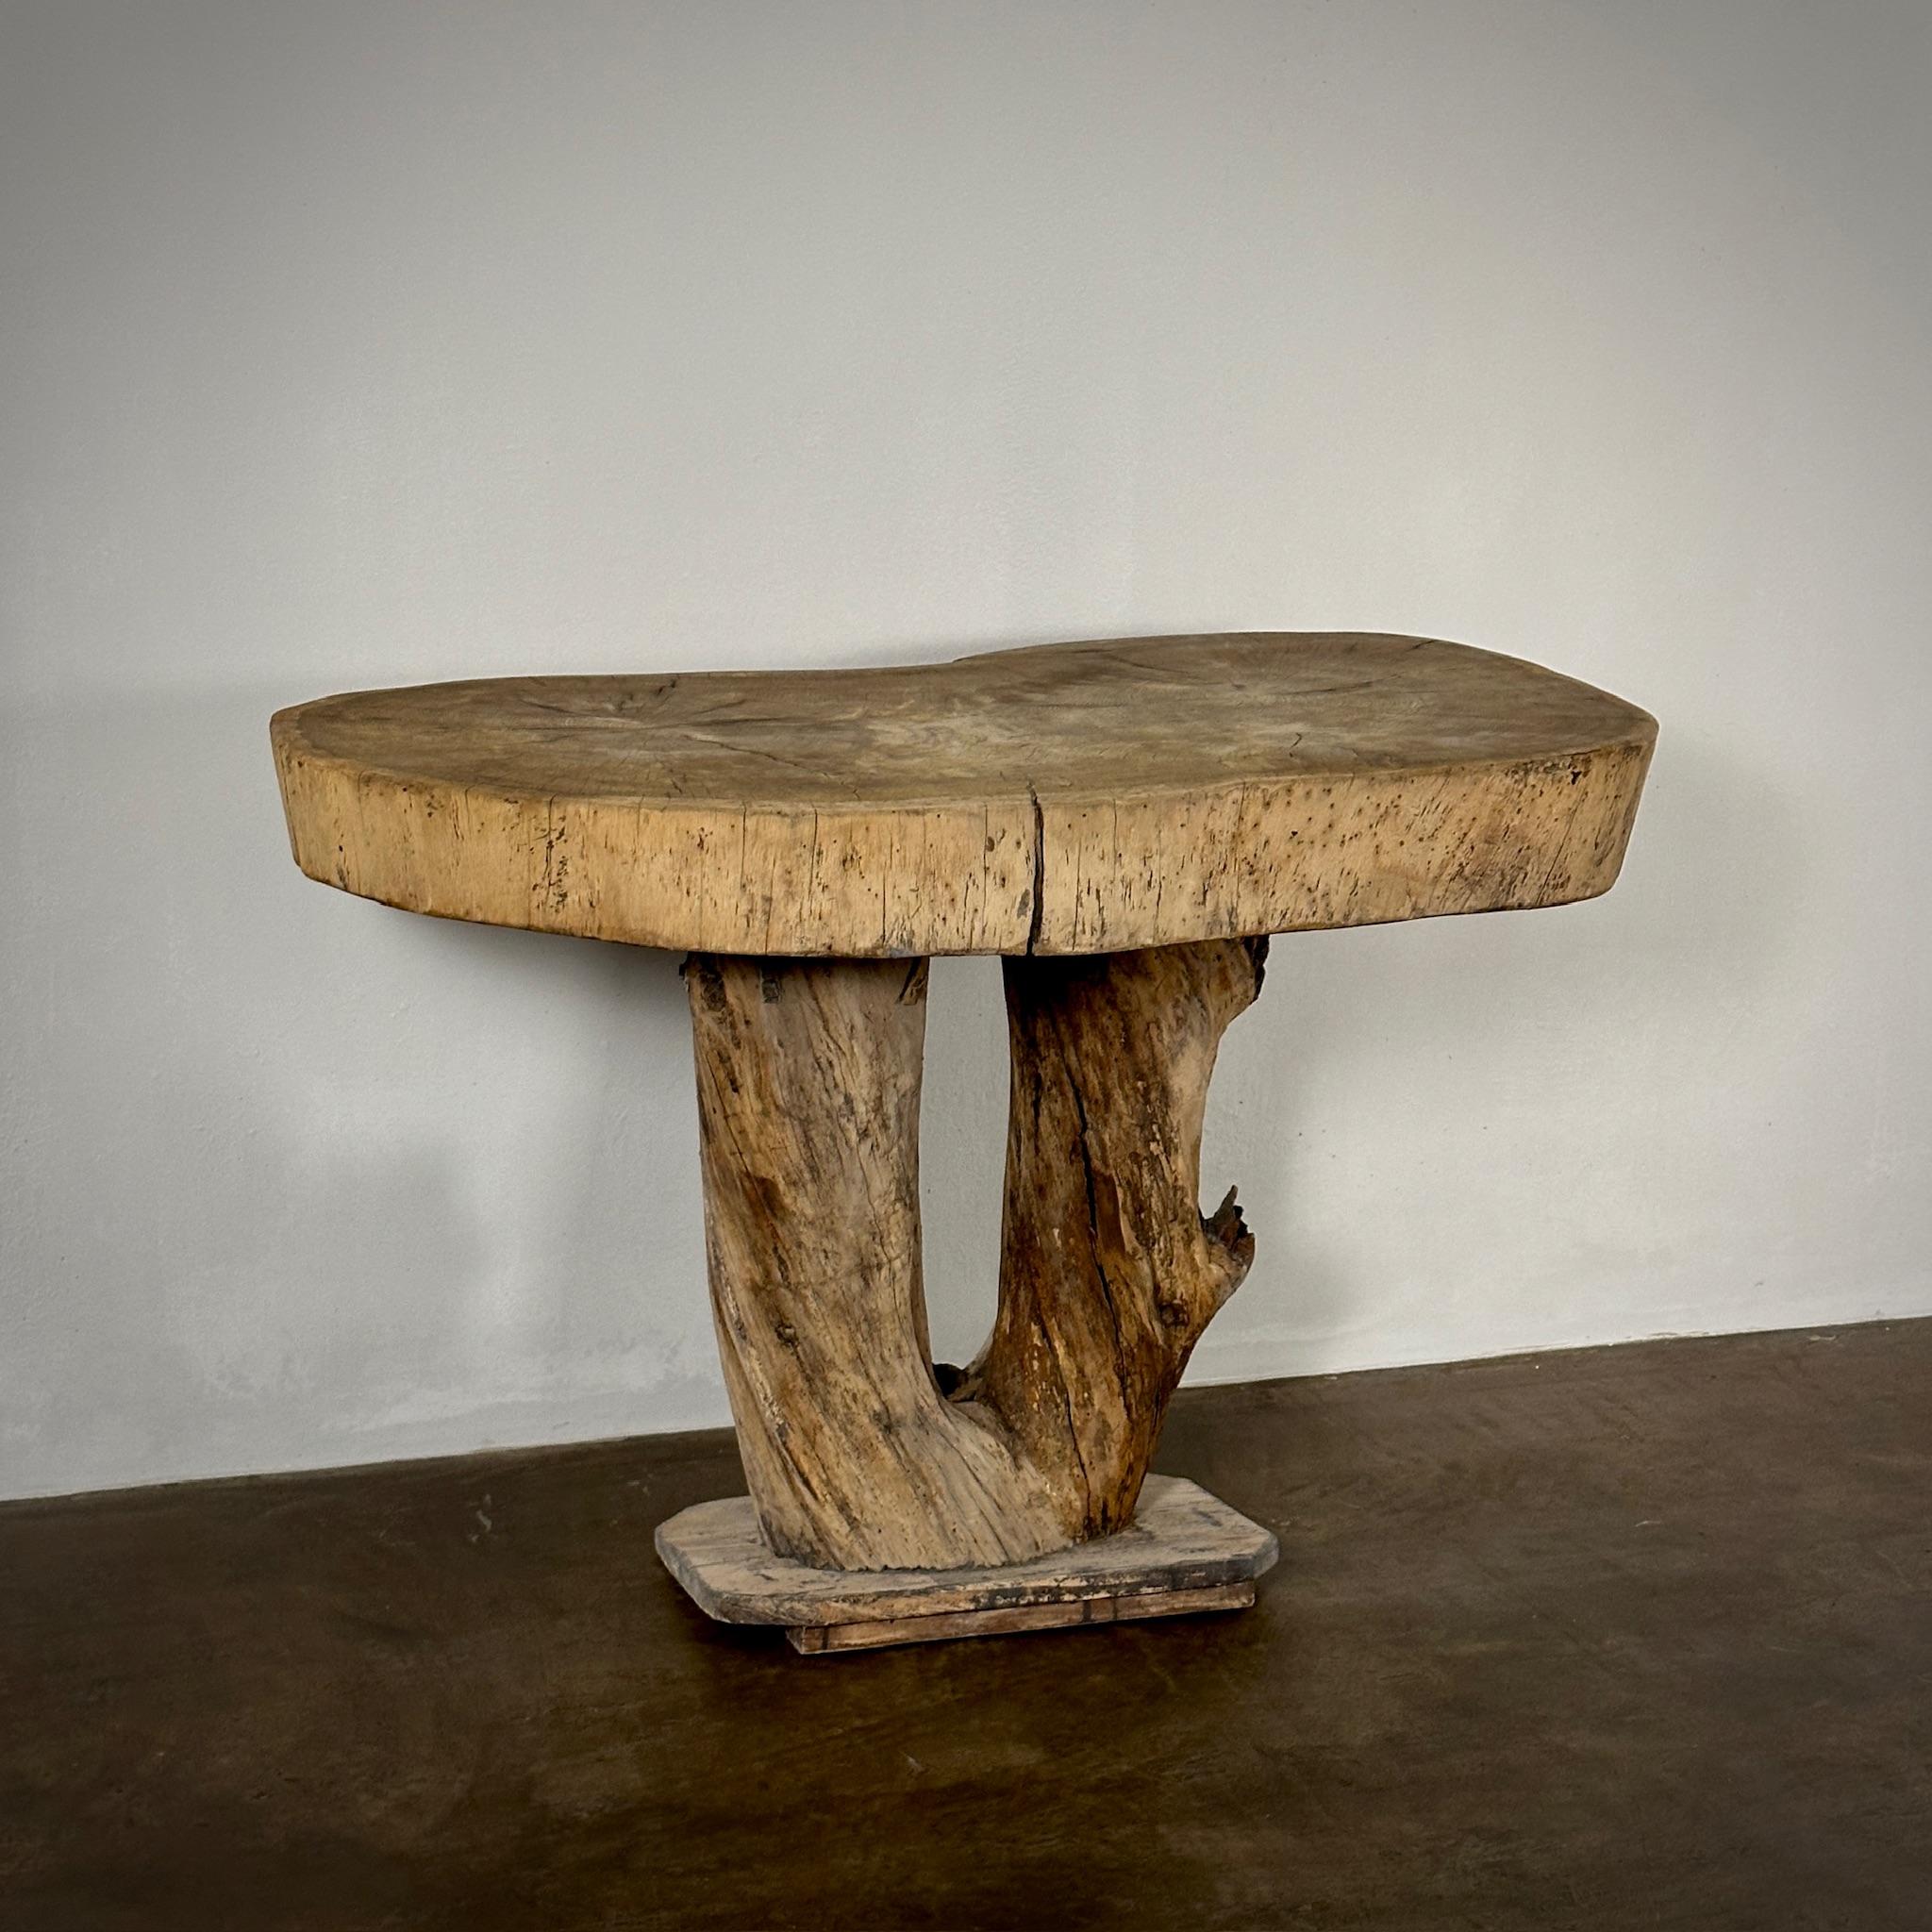 Early 20th century French naturalist end or accent table with live edge wood surface and natural wood base. Rustic and graceful in equal measure.

France, circa 1910

Dimensions: 42.5W x 24D x 29H